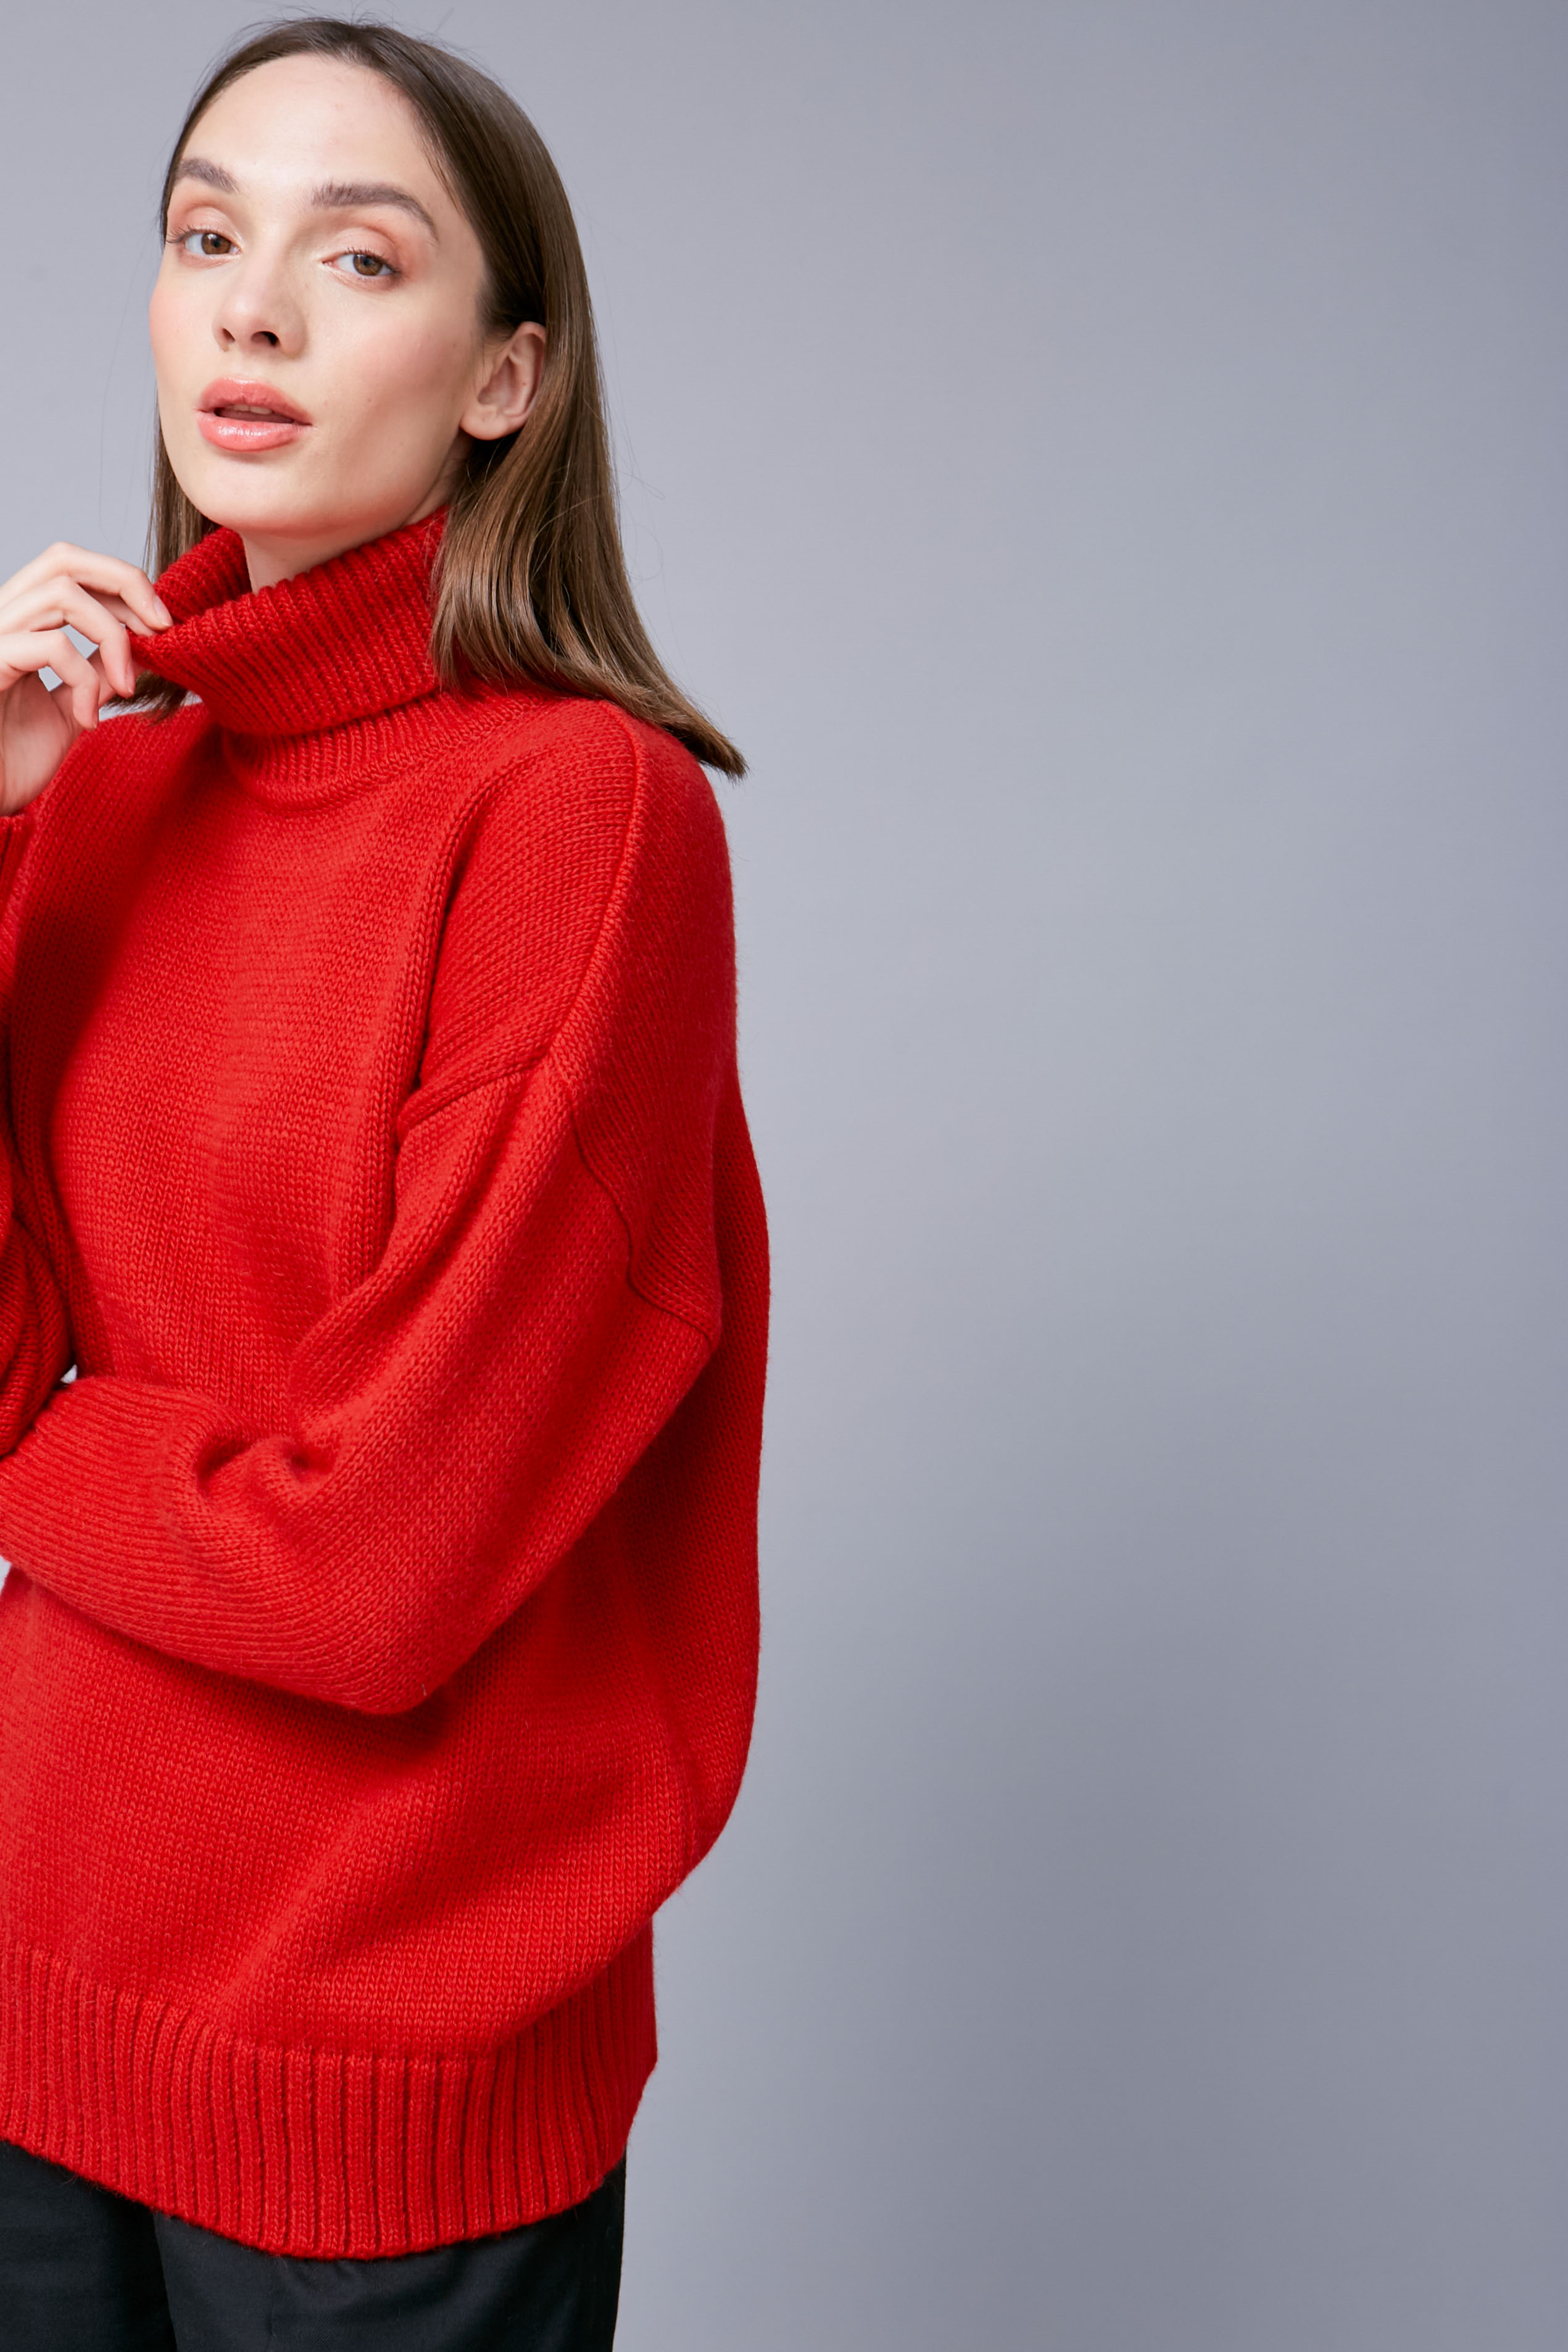 Red knit turtleneck sweater, photo 1